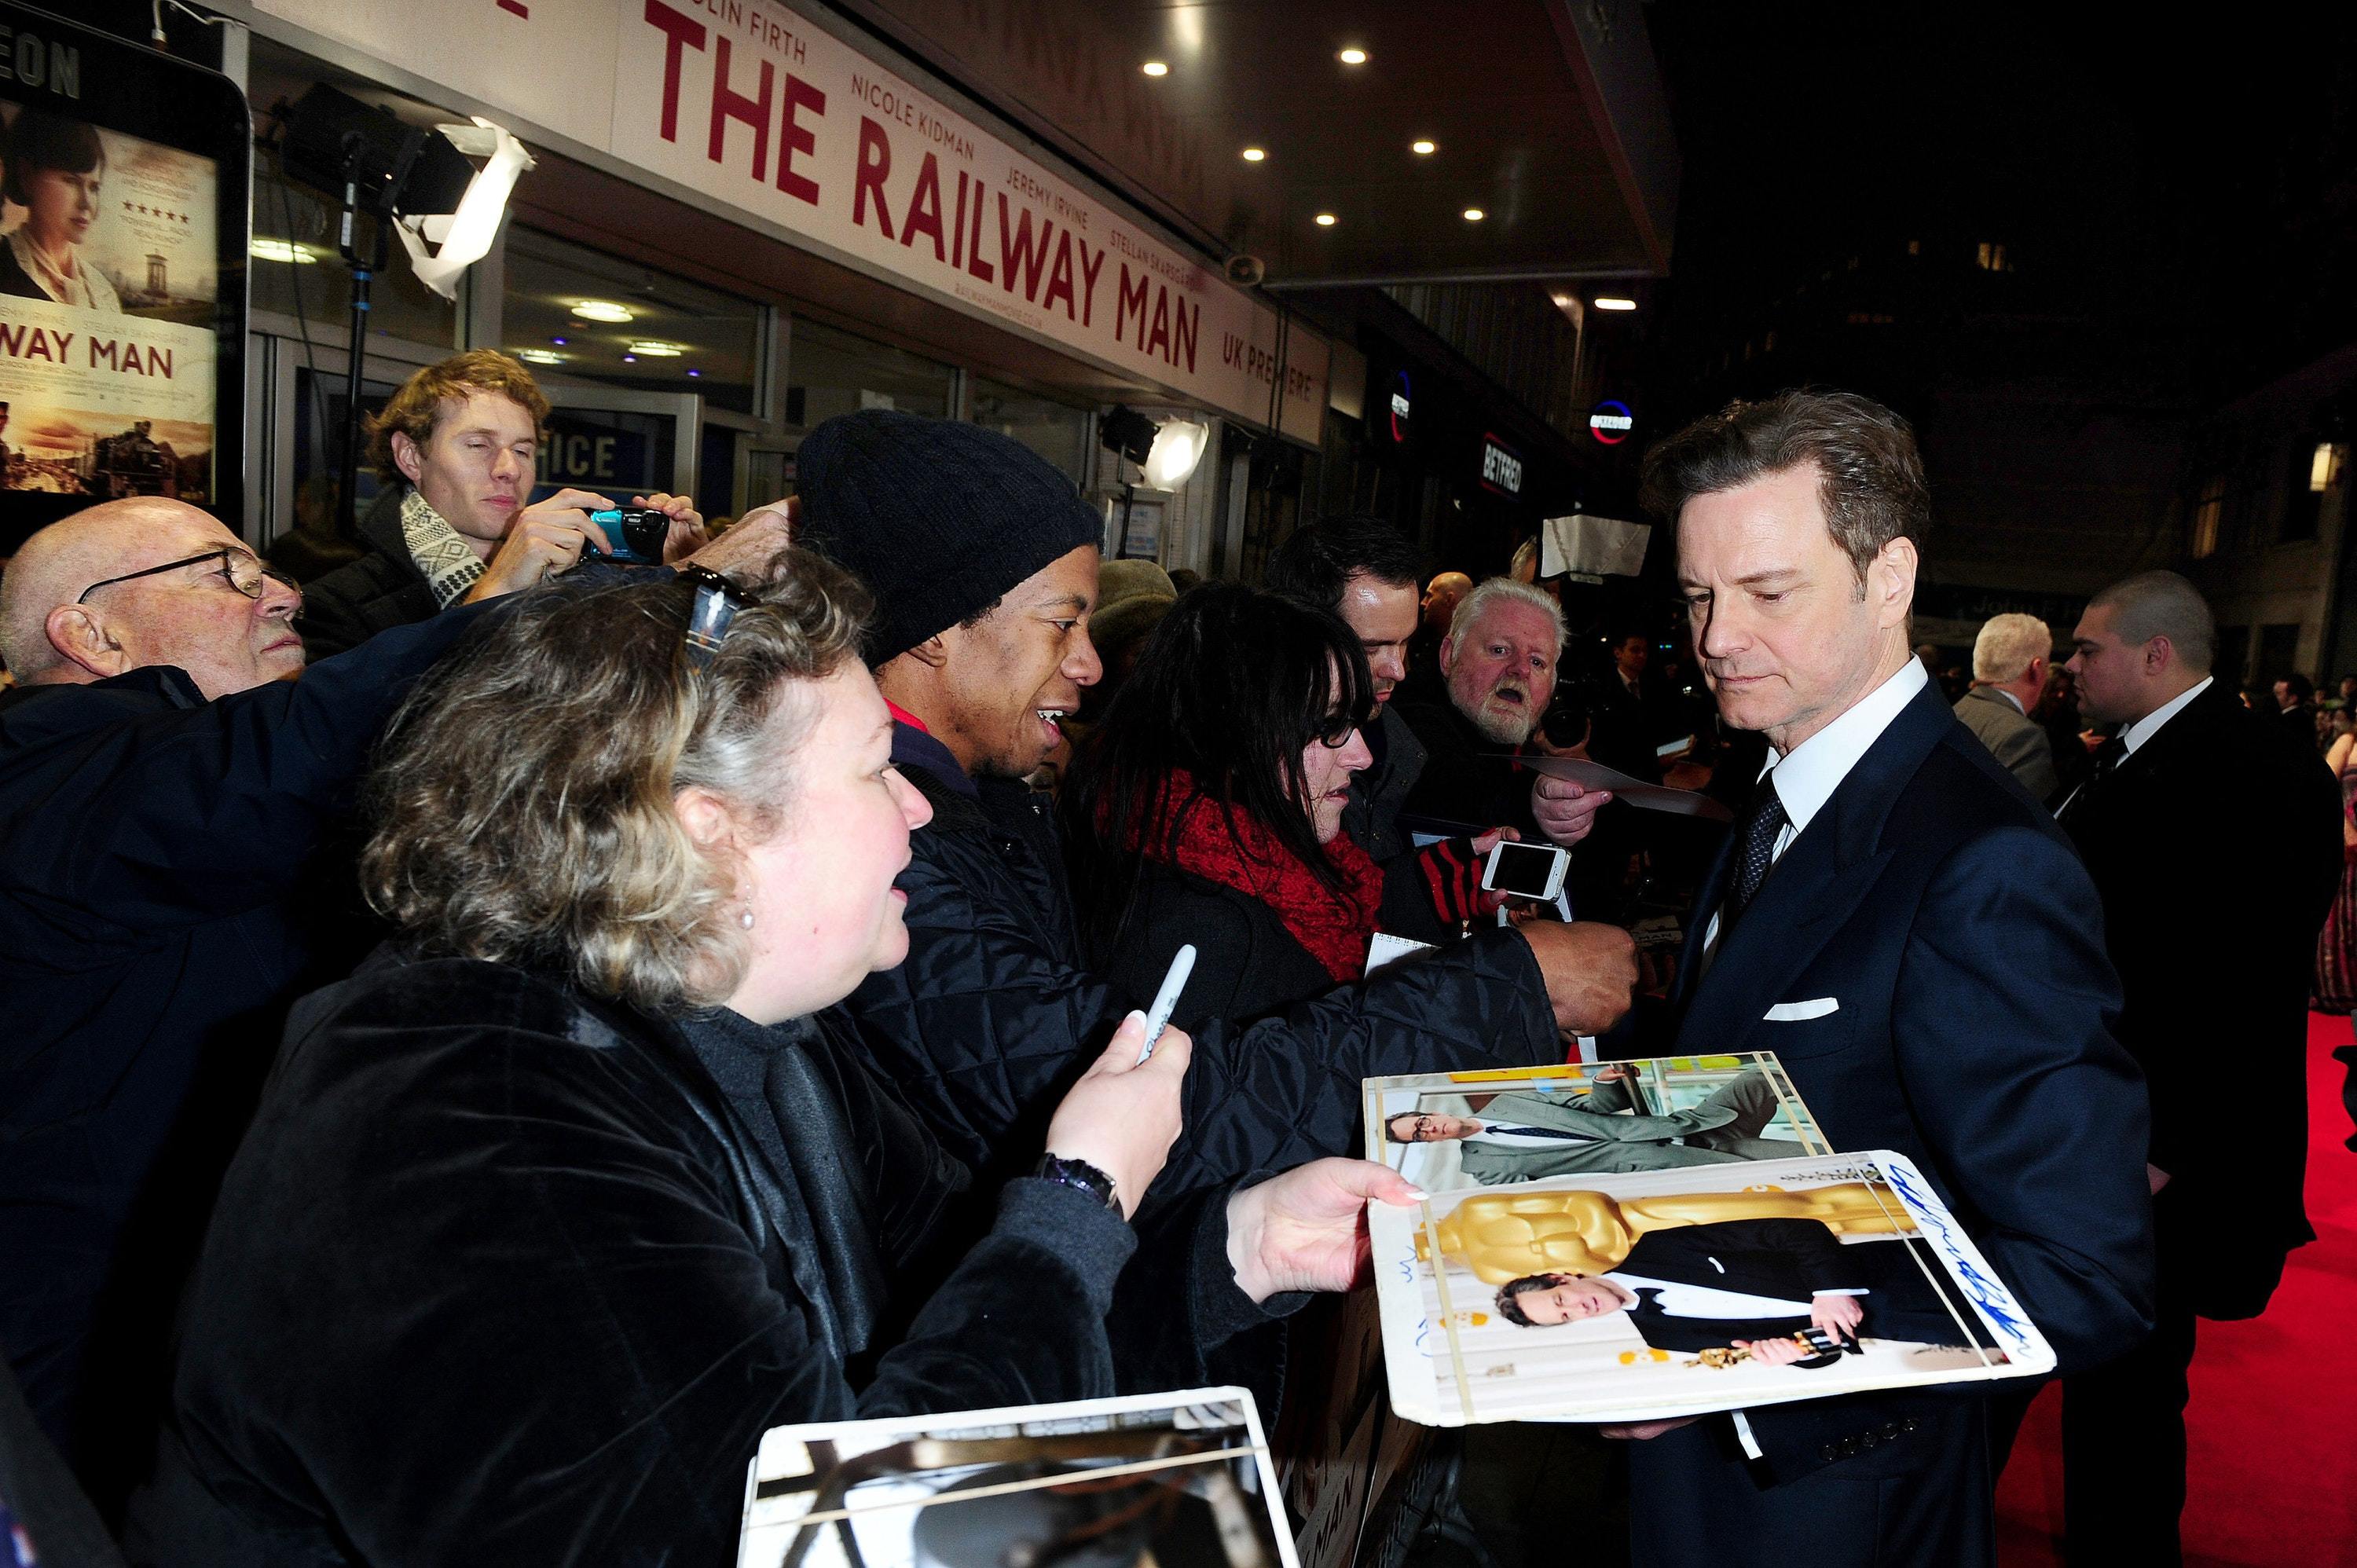 Colin Firth attending the UK film premiere of The Railway Man (Ian West/PA)